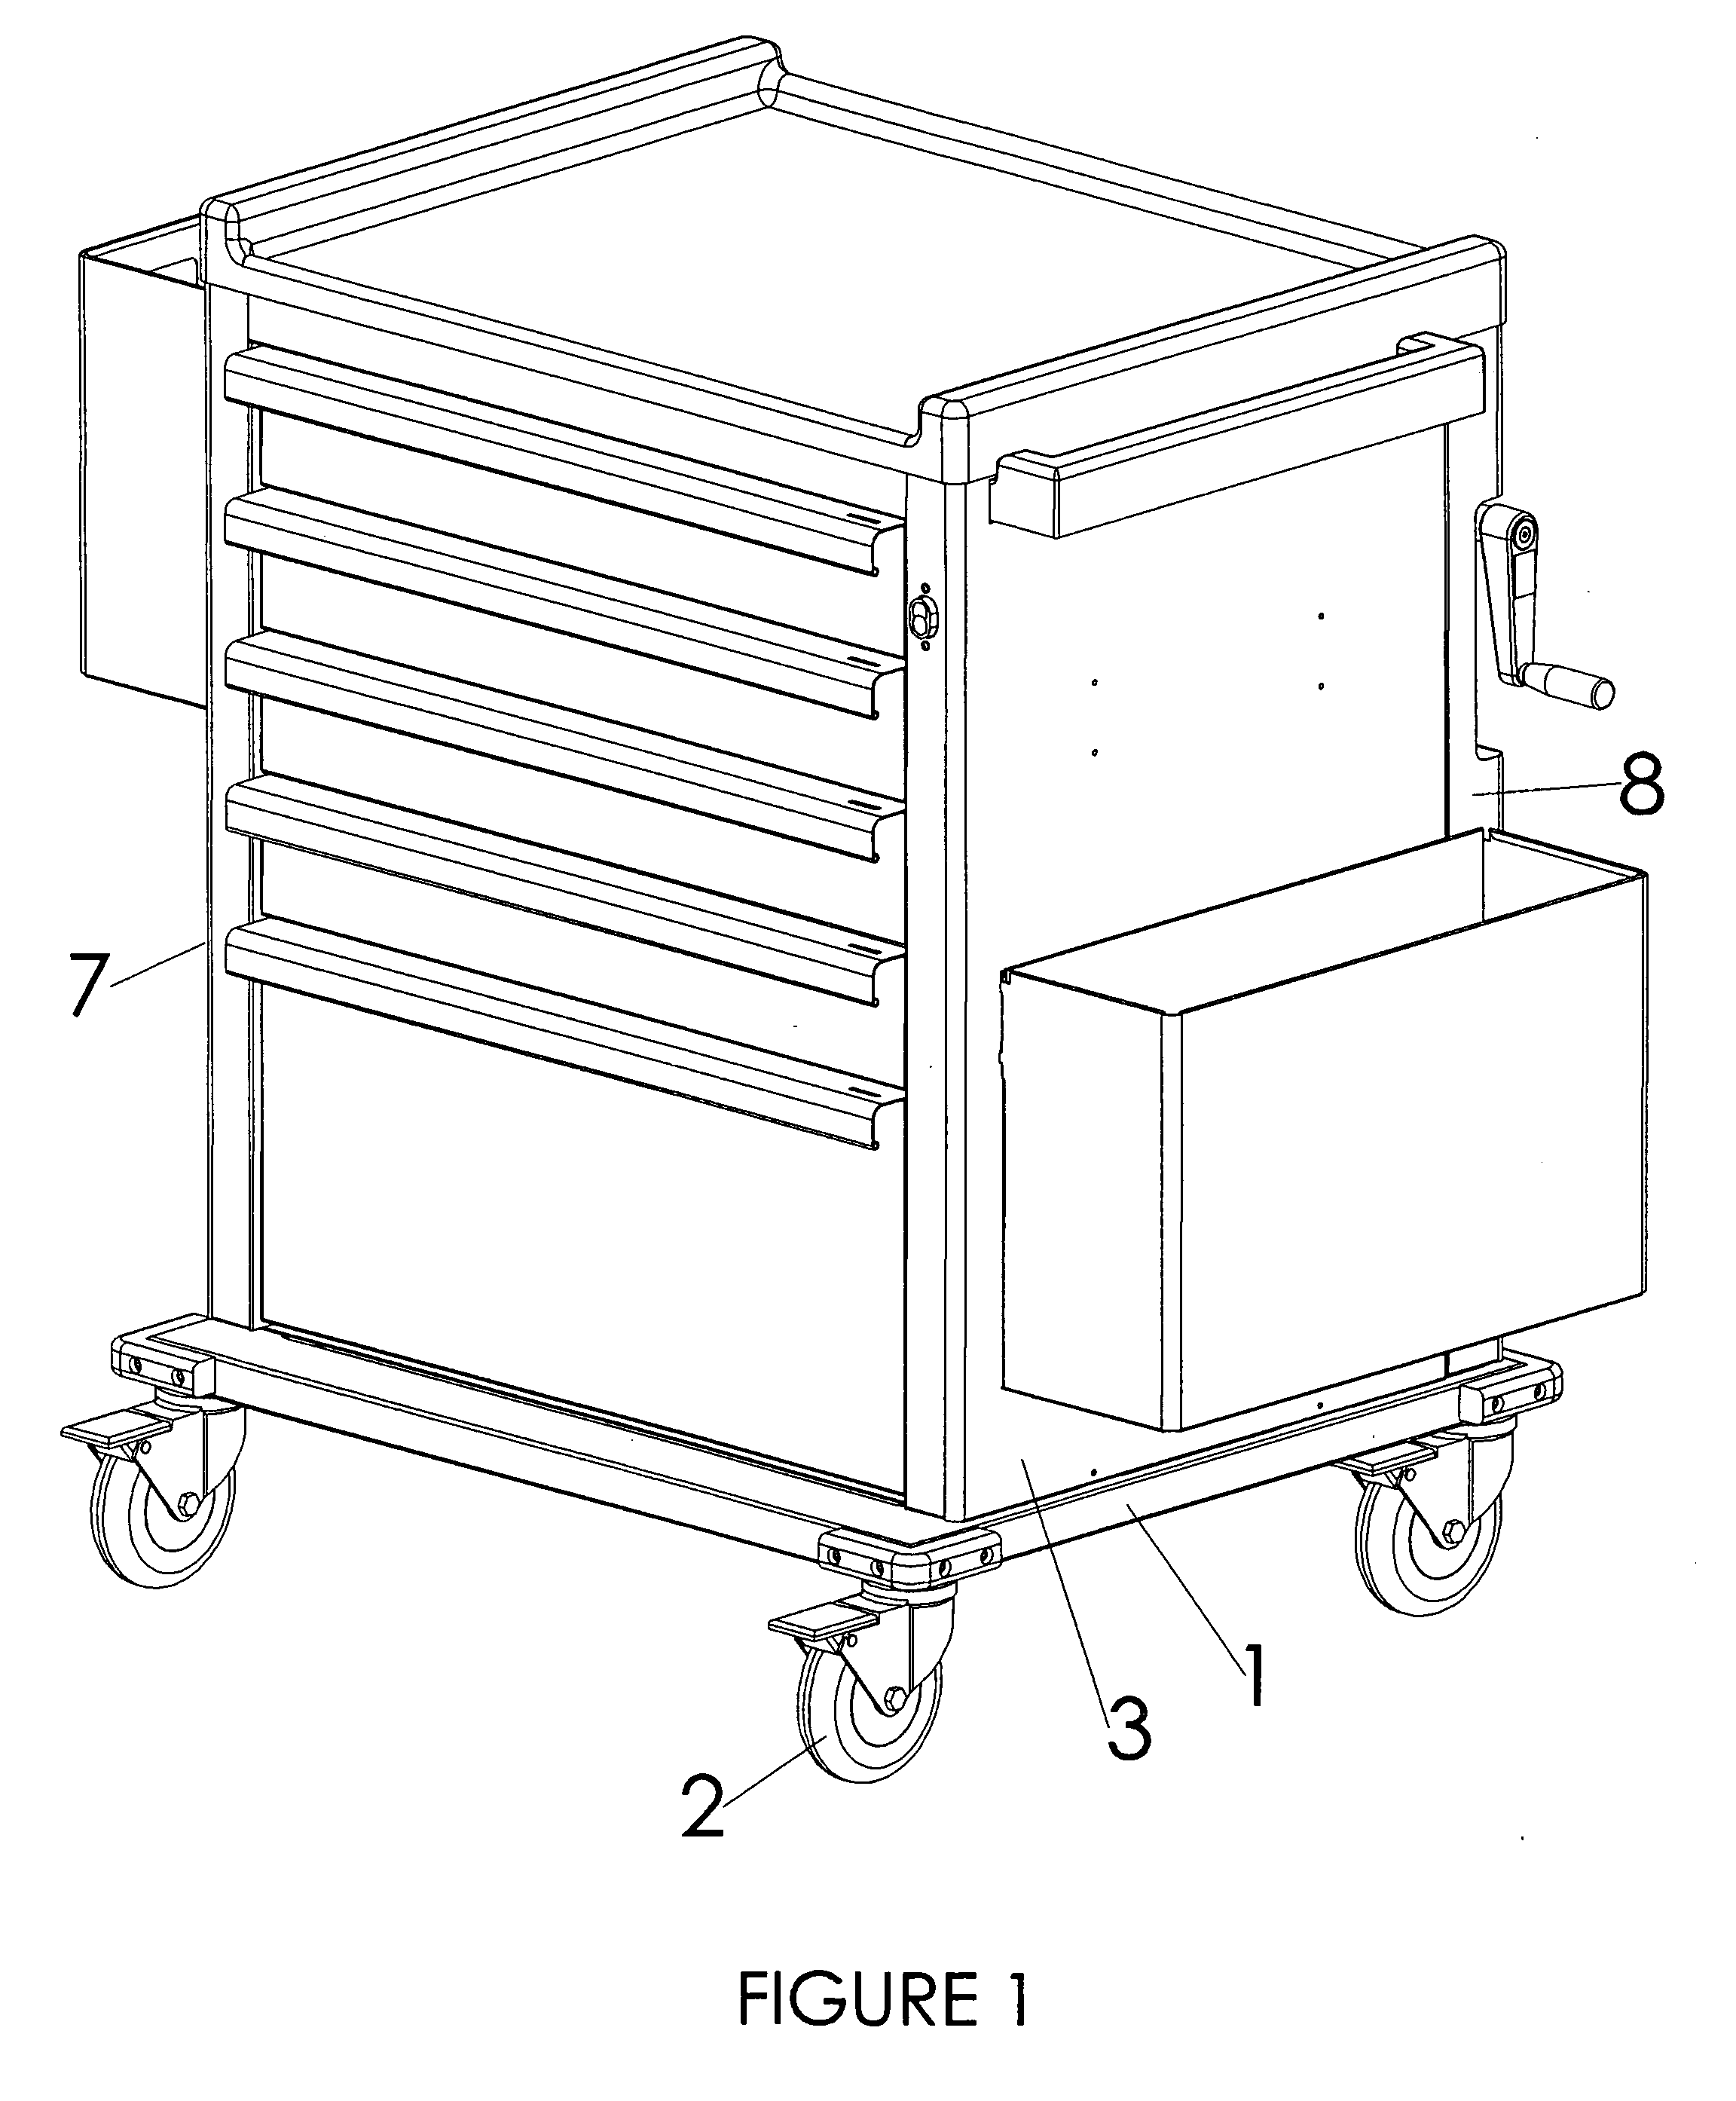 Medication cart with height adjustment